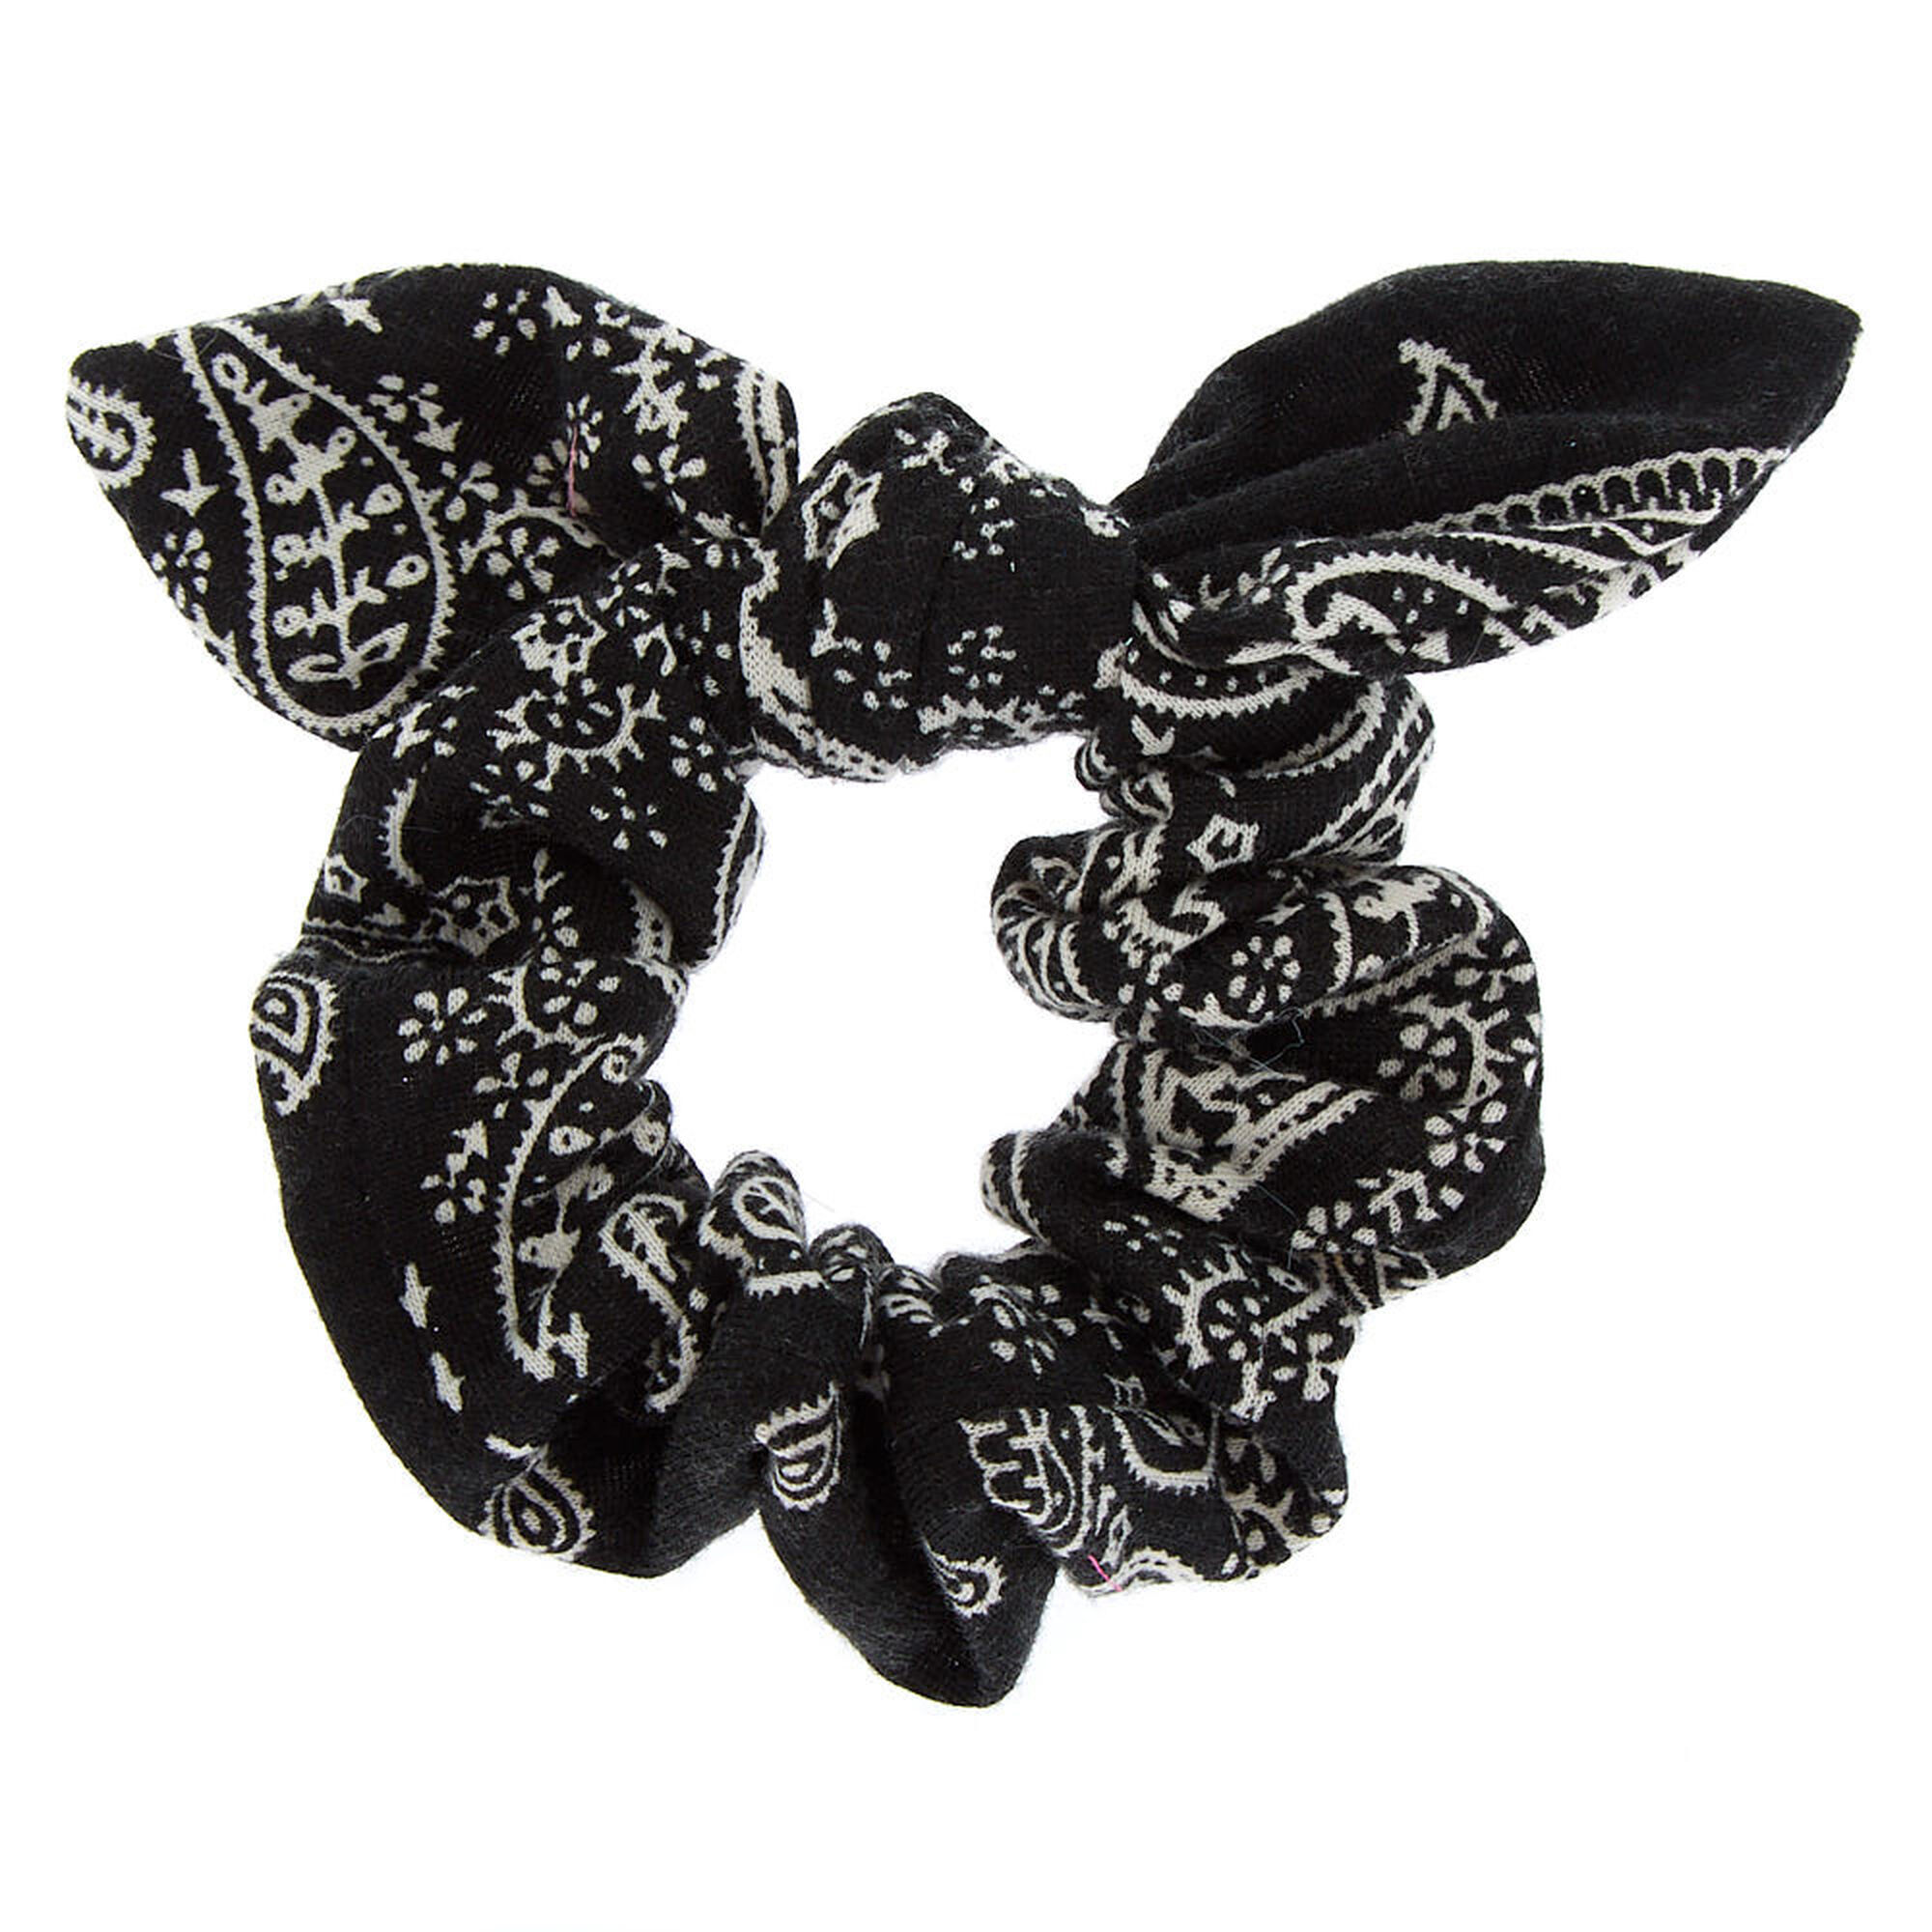 View Claires Floral Paisley Silky Bandana Headwrap Black information